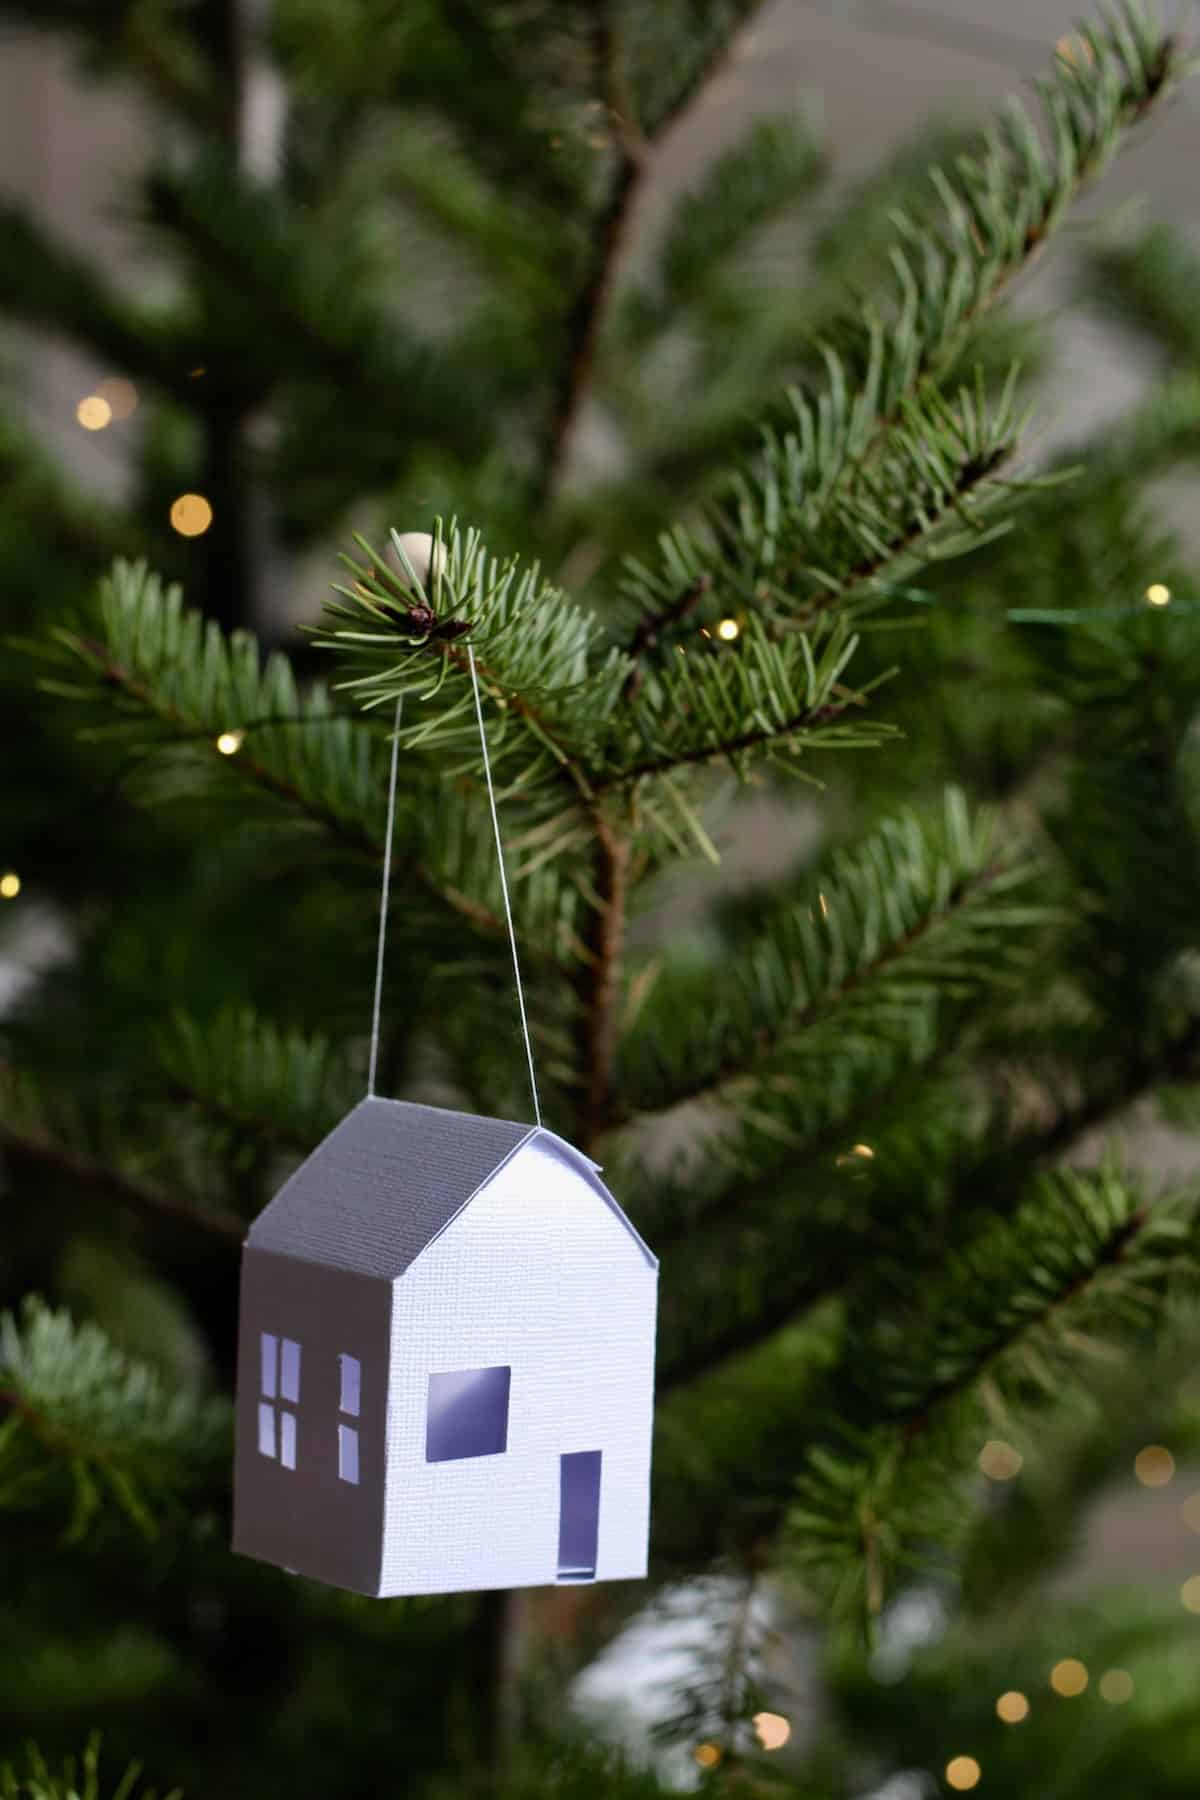 Paper house ornament on christmas tree